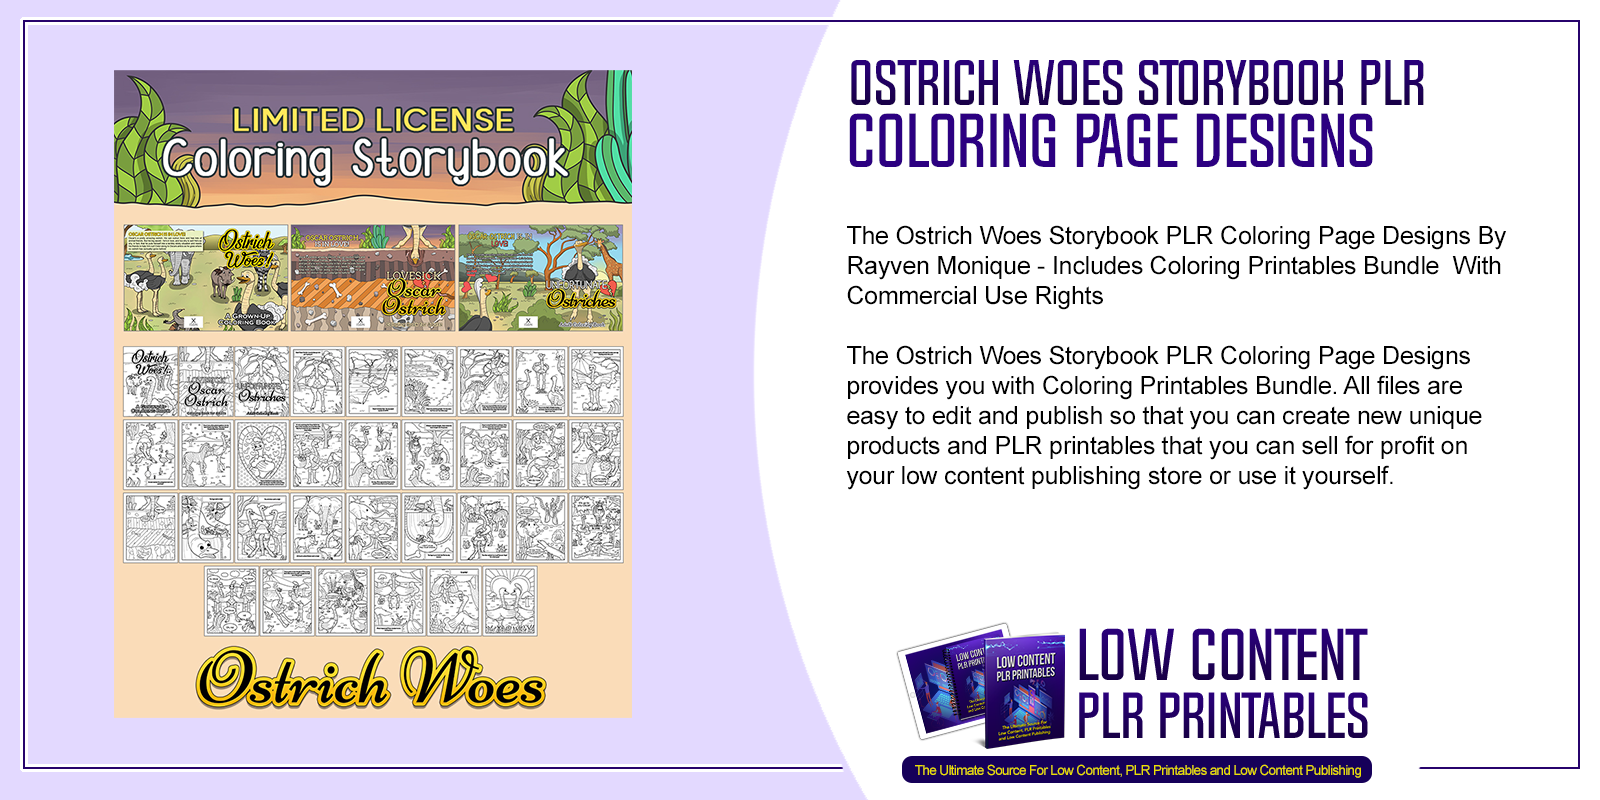 Ostrich Woes Storybook PLR Coloring Page Designs